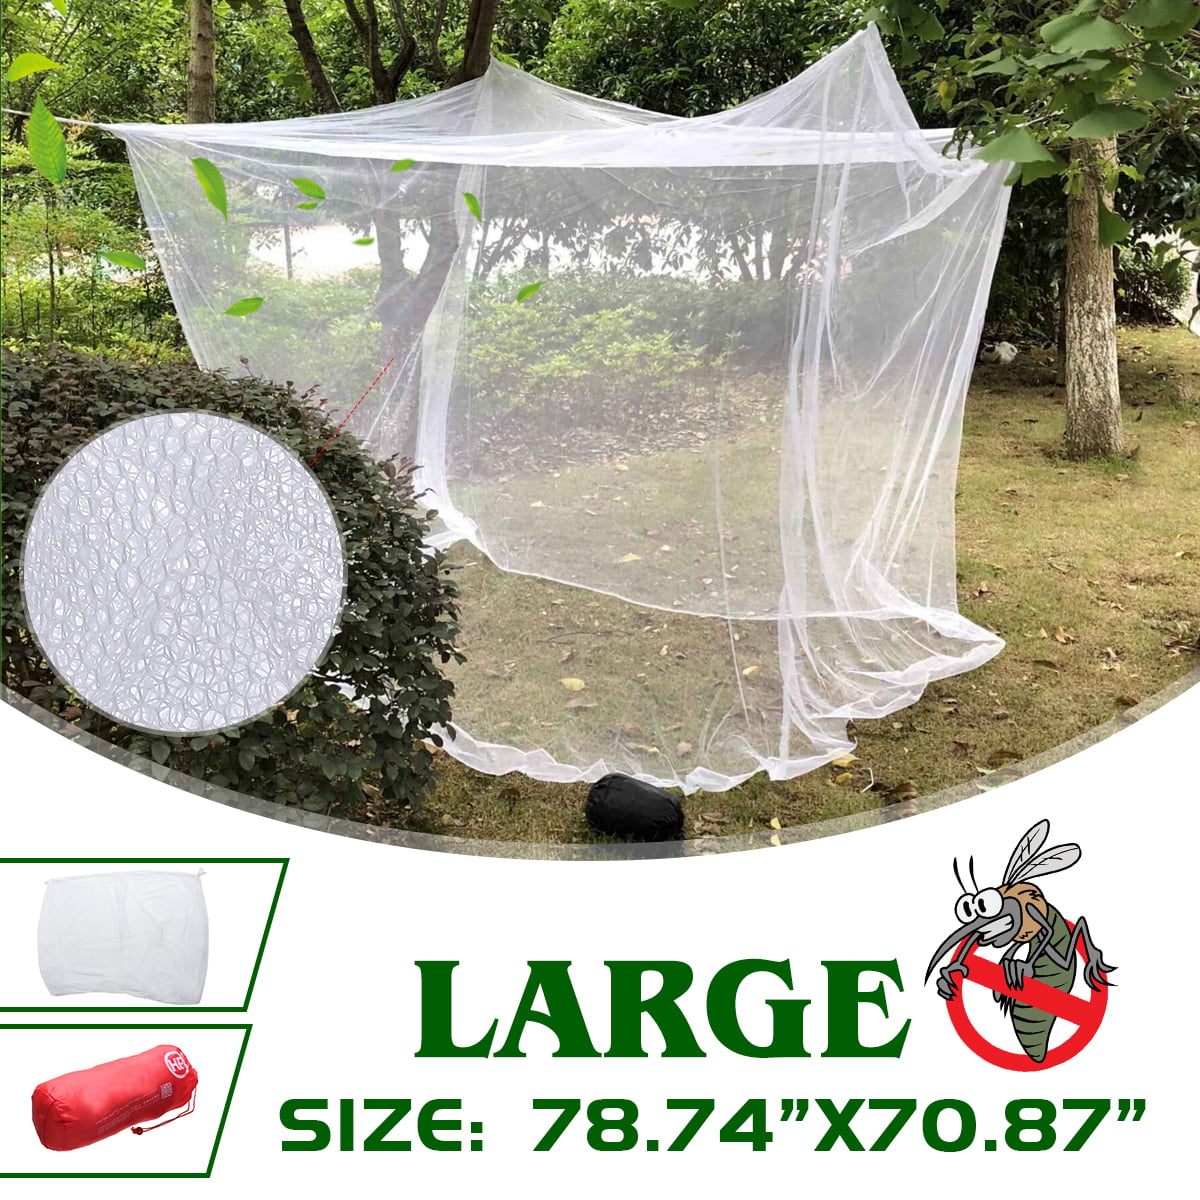 Large White Camping Mosquito Net Indoor Outdoor Insect L6C0 Tent Storage L2J0 